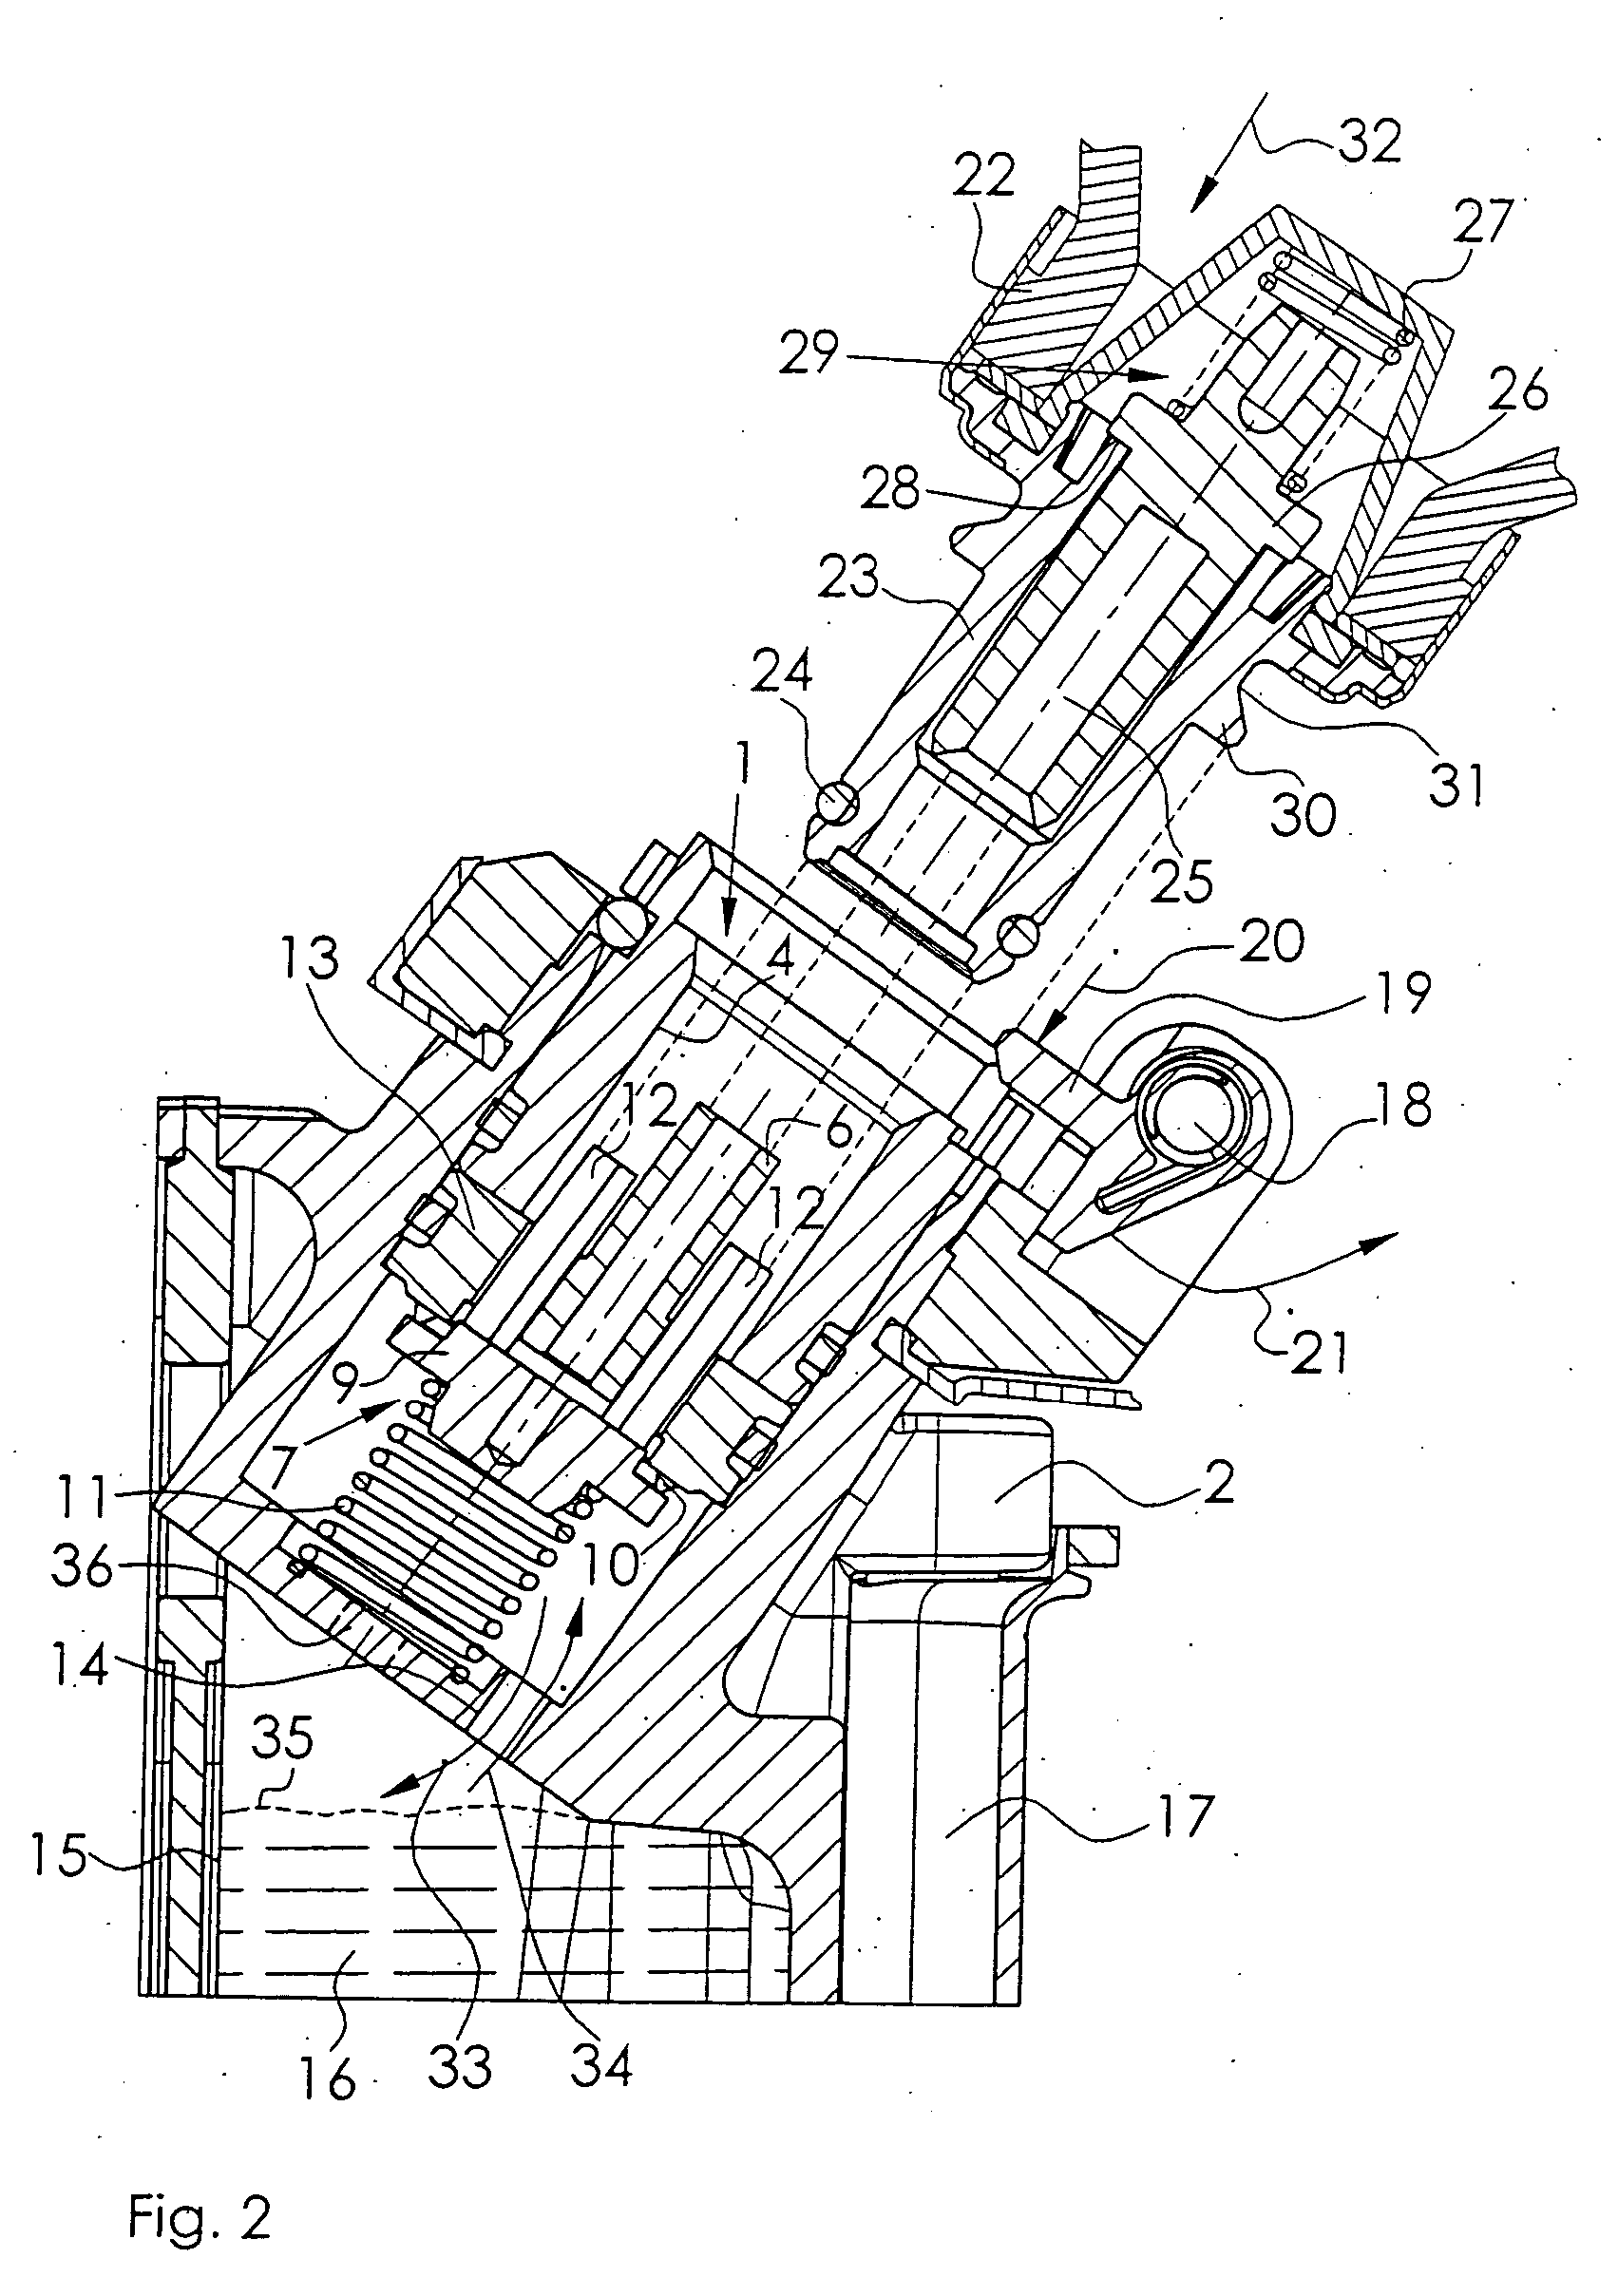 Filling device for an anesthetic evaporator